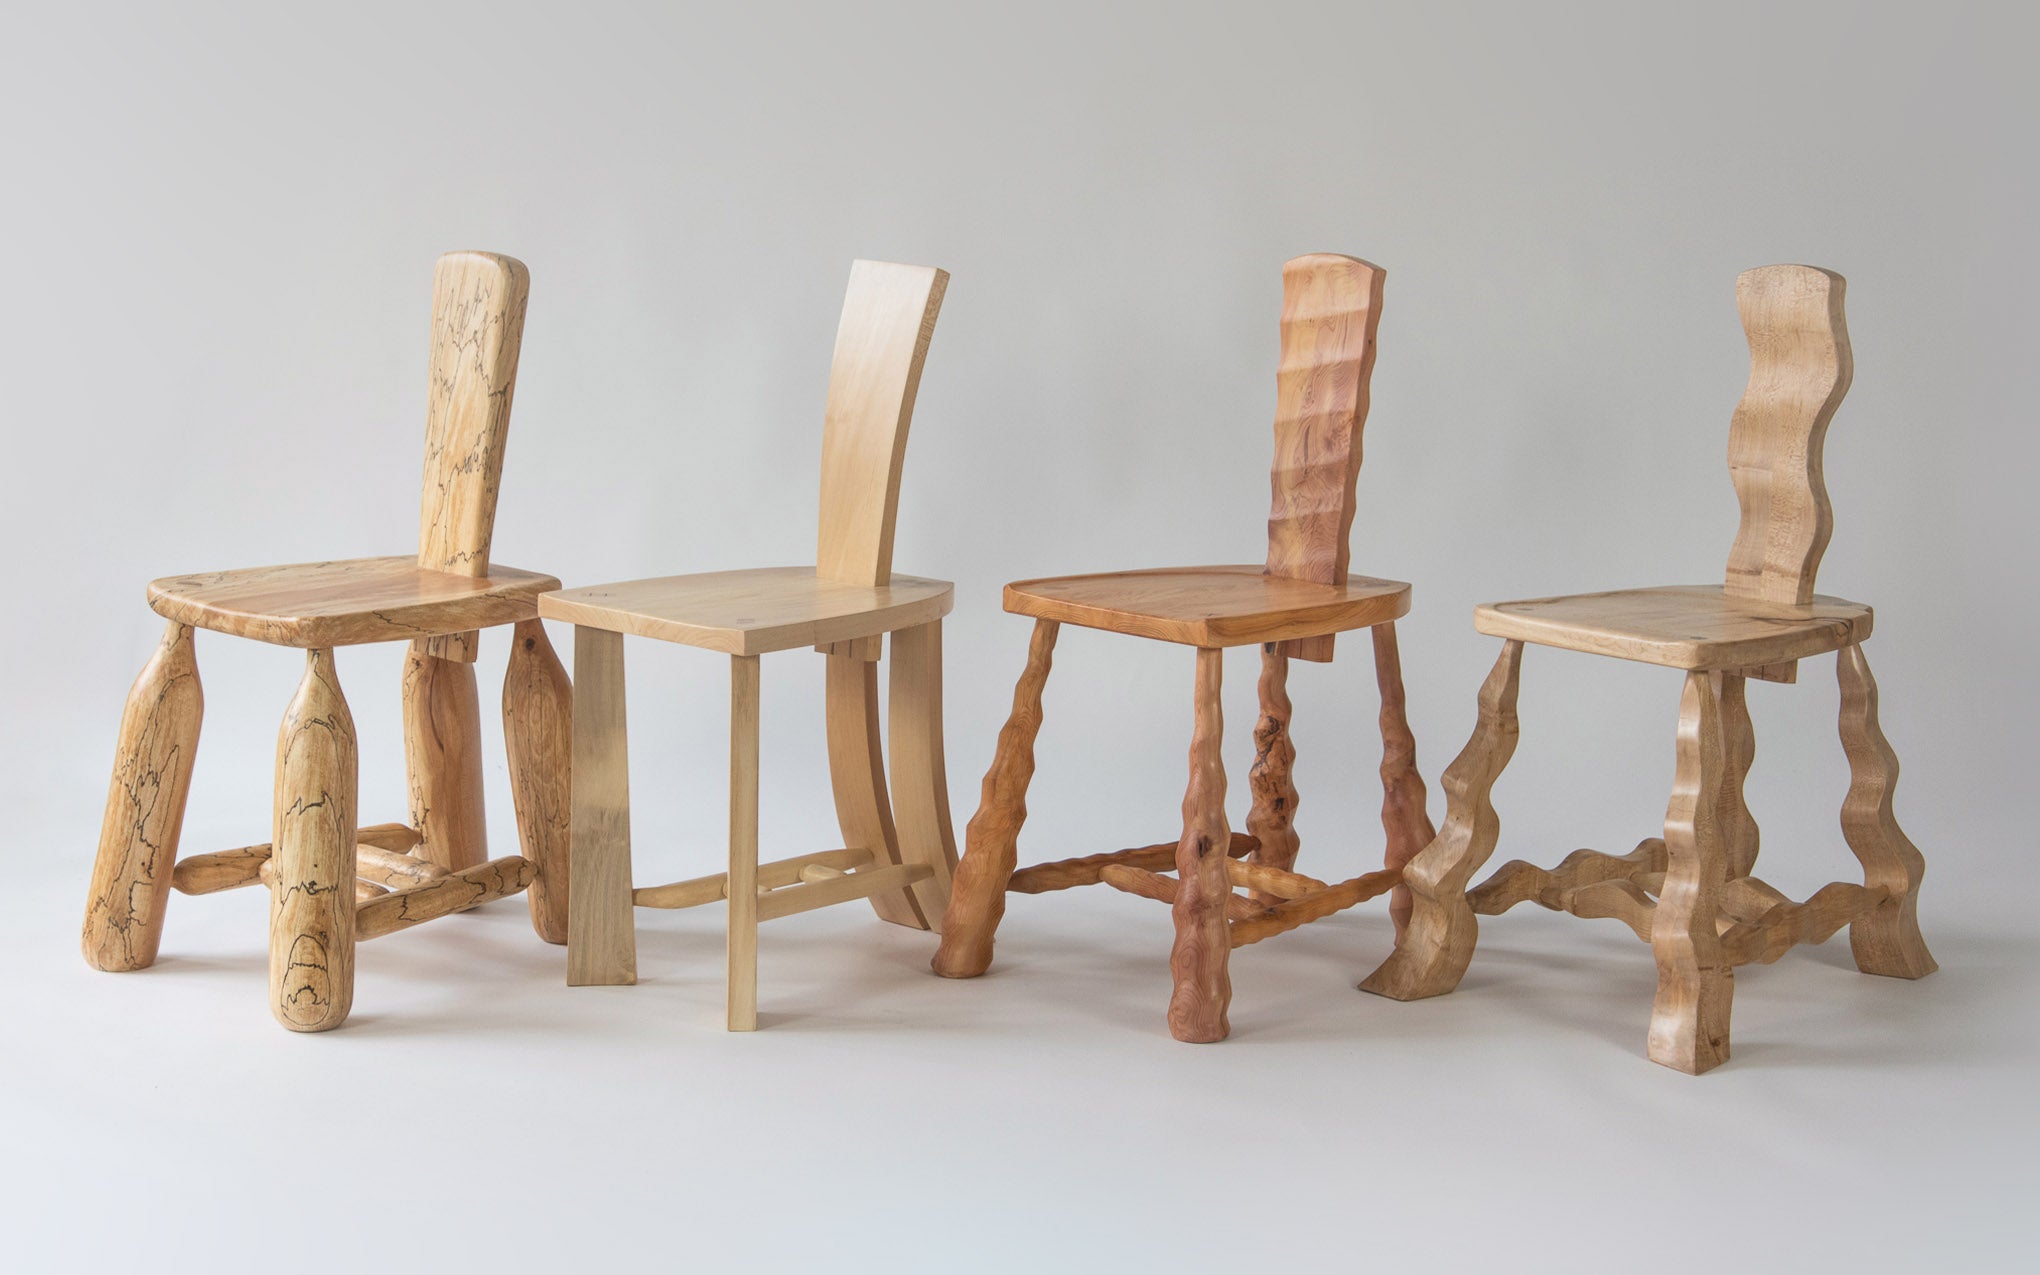 Of Nature - Whipped chair by Wilkinson & Rivera | SCP